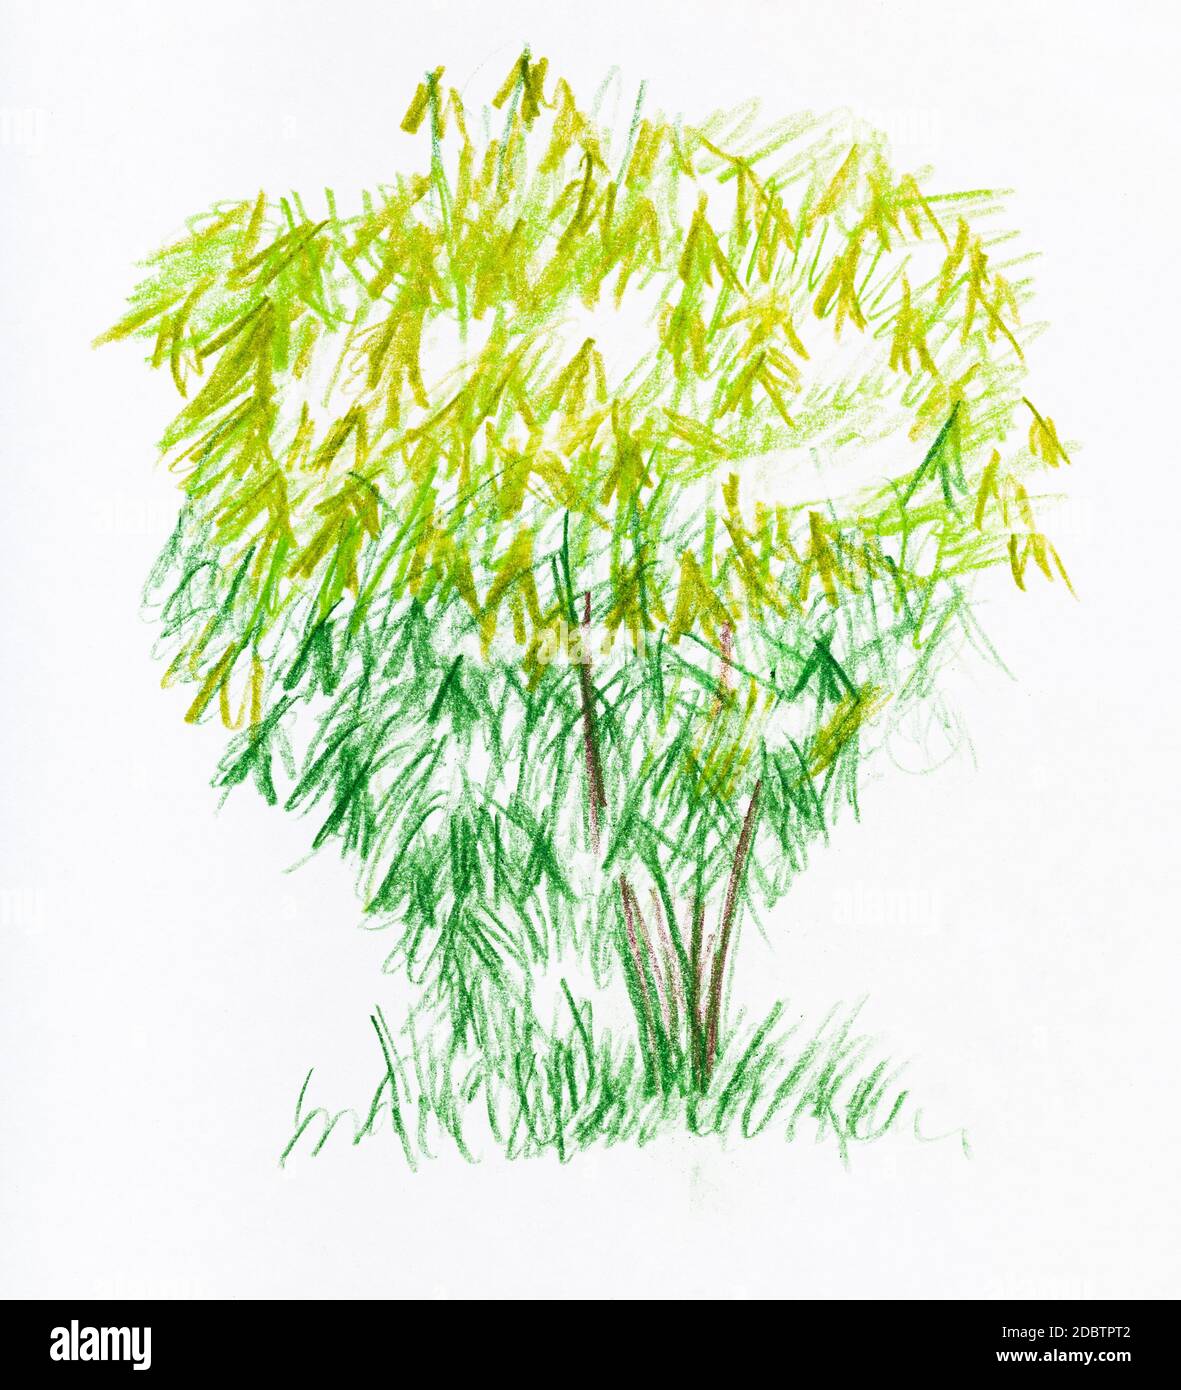 https://c8.alamy.com/comp/2DBTPT2/sketch-of-small-tree-with-lush-foliage-in-spring-hand-drawn-by-color-pencils-on-white-paper-2DBTPT2.jpg